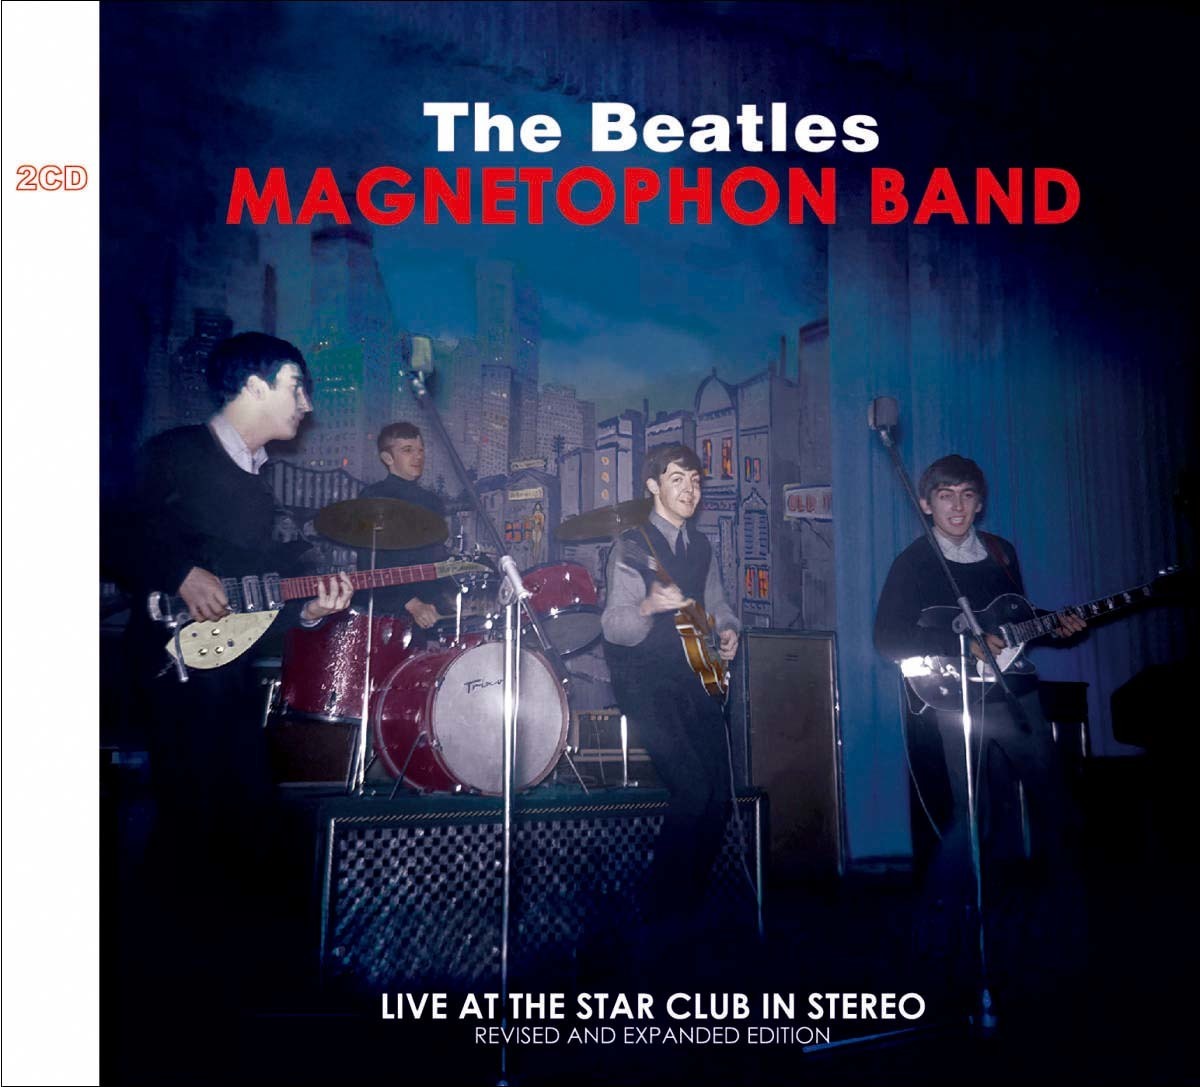 2CD The Beatles Live at The Star Club in Stereo REVISED AND EXPANDED  EDITION ијёе…Ґгѓ—гѓ¬г‚№з›¤(гЃќгЃ®д»–)пЅњеЈІиІ·гЃ•г‚ЊгЃџг‚Єгѓјг‚Їг‚·гѓ§гѓіжѓ…е ±гЂЃyahooгЃ®е•†е“Ѓжѓ…е ±г‚’г‚ўгѓјг‚«г‚¤гѓ–е…¬й–‹ - г‚Єгѓјг‚Їгѓ•г‚Ўгѓіпј€aucfan.comпј‰